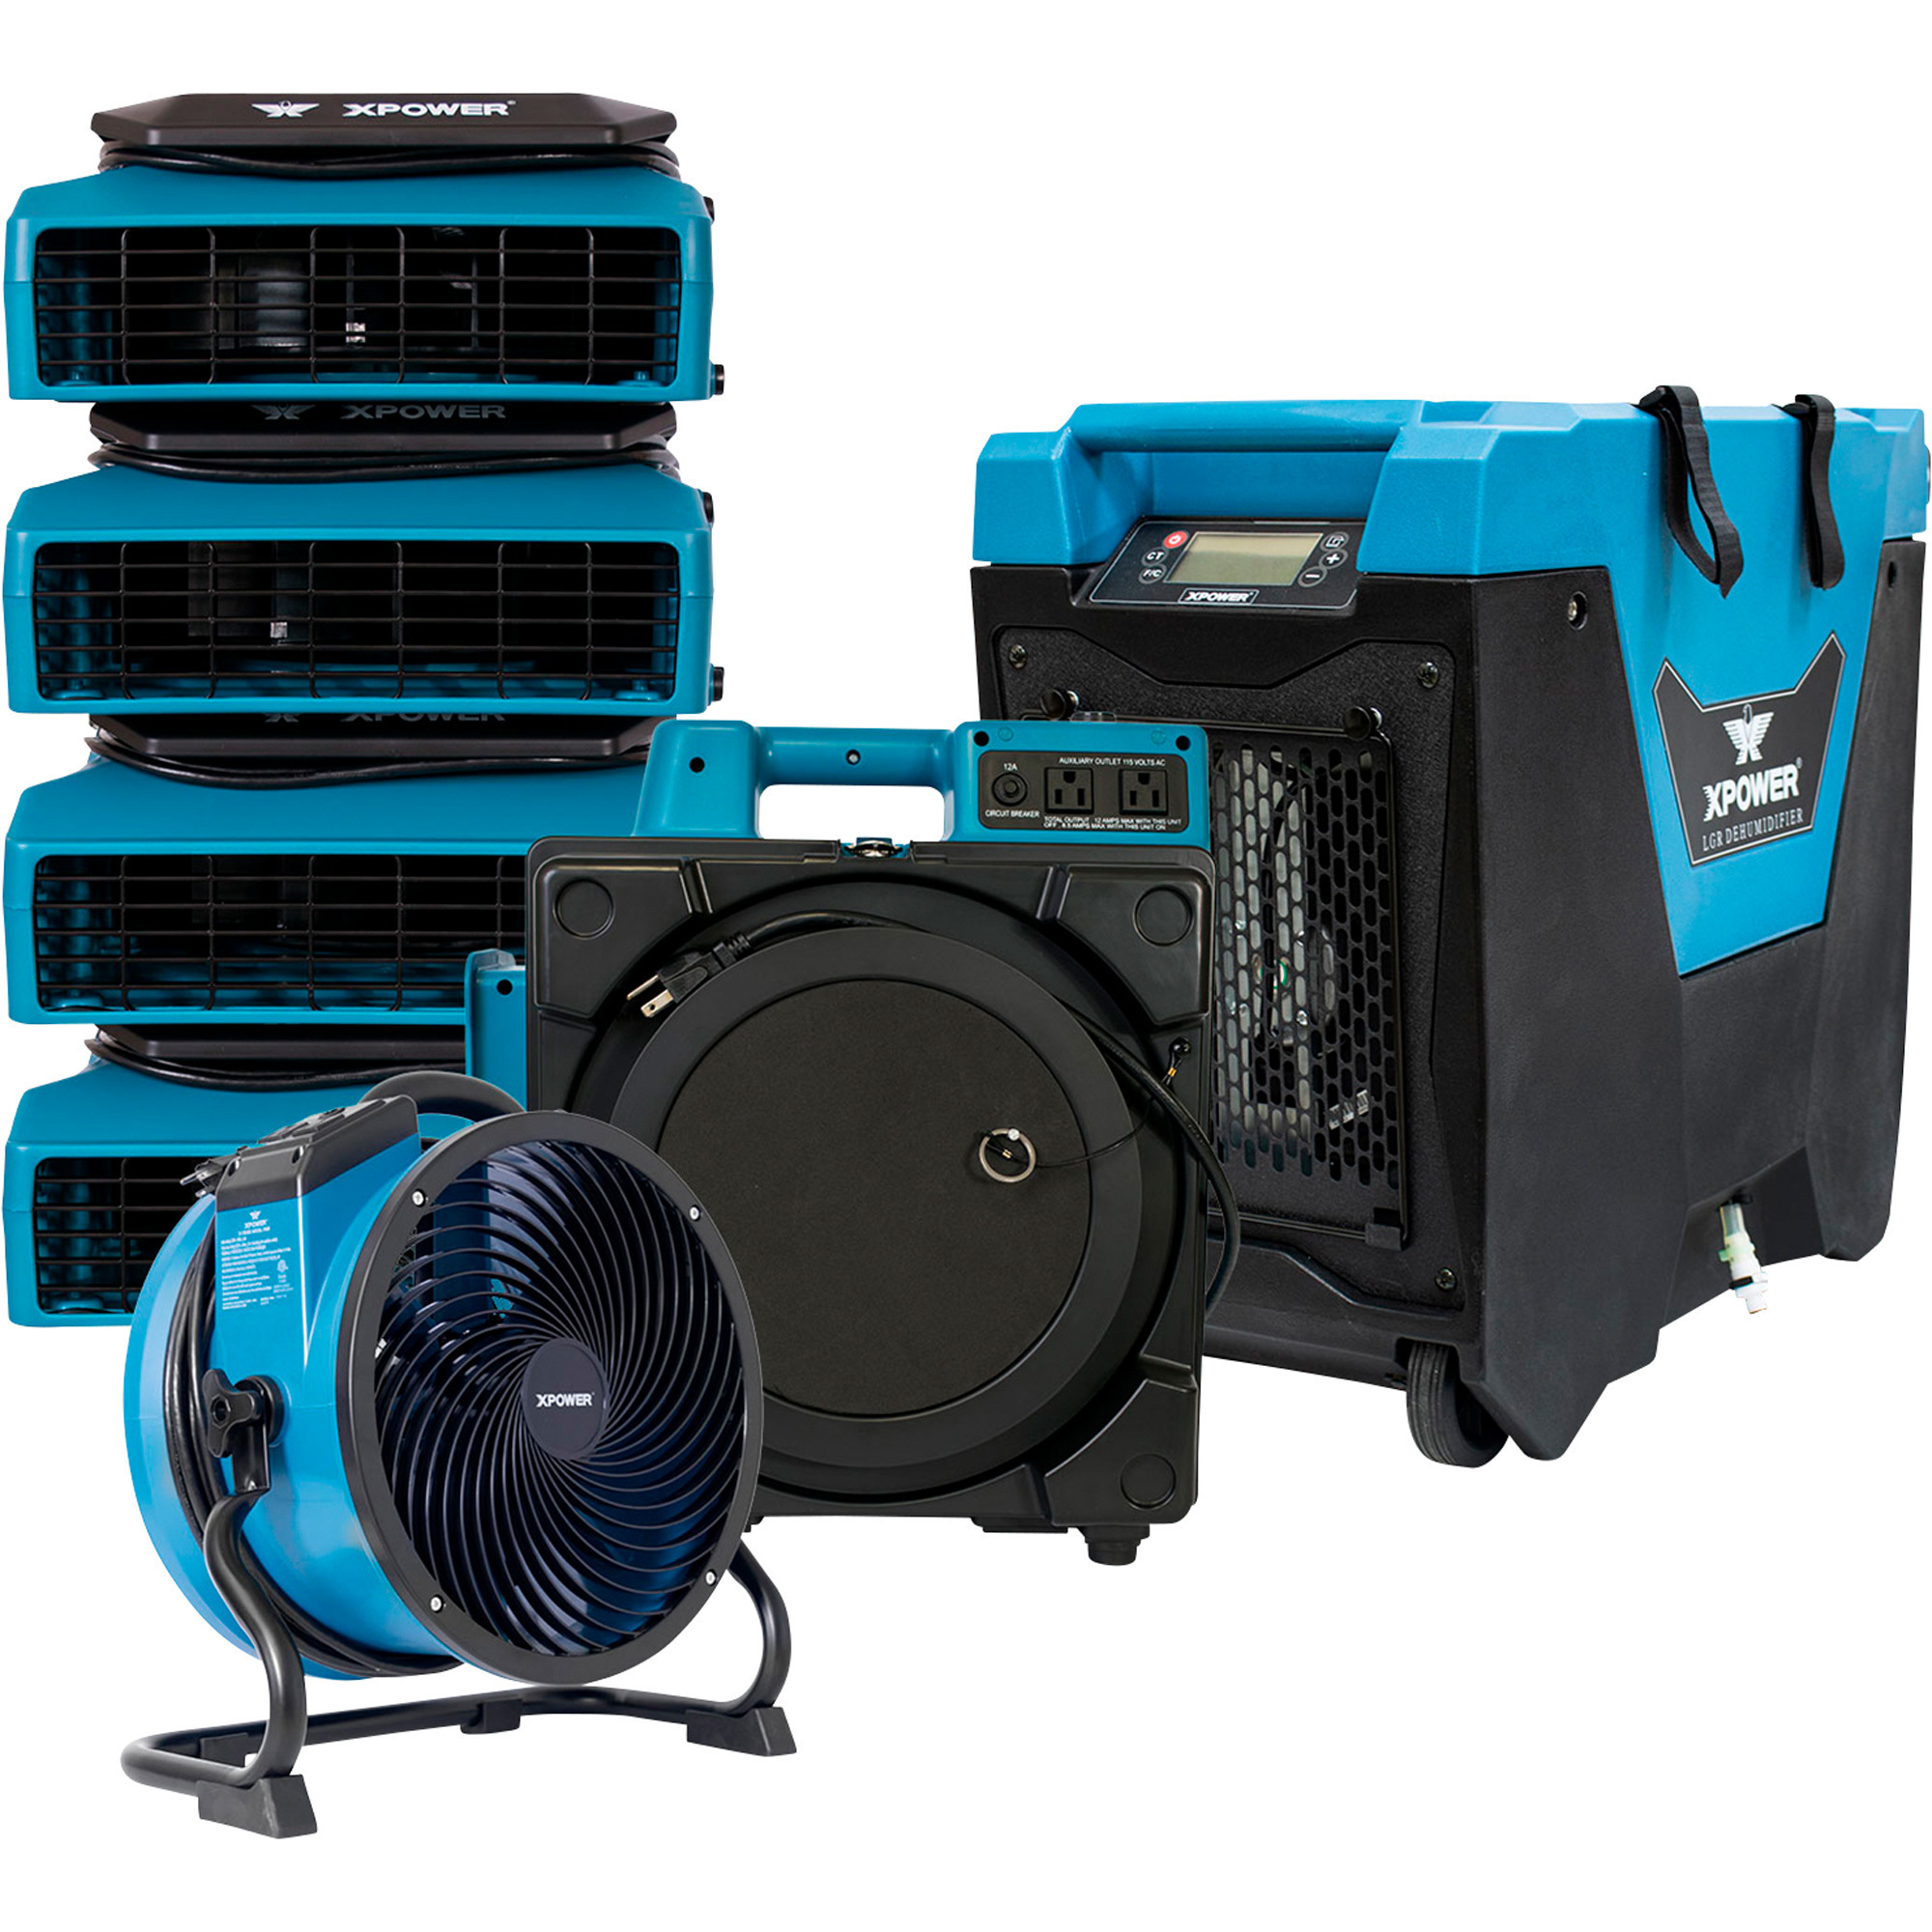 XPOWER 7-Piece Water Contractor Pack, (4) Low-Profile Air Movers, (1) Axial Air Mover, (1) Commercial Mini Air Scrubber and (1) Commercial LGR